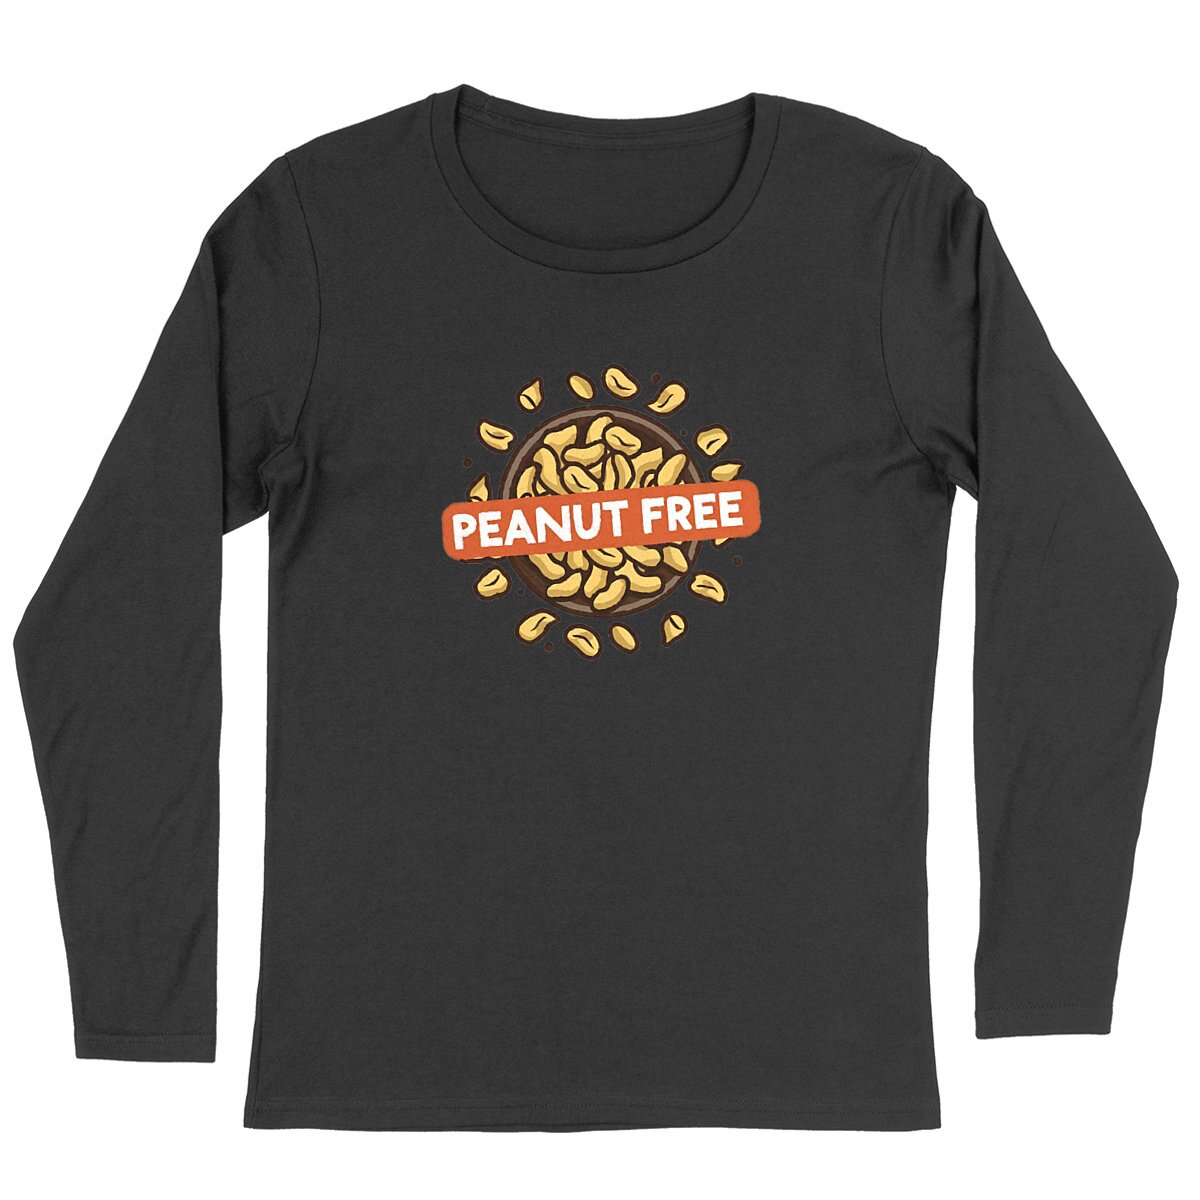 Peanut Free Long Sleeve Organic Cotton Graphic Shirt | Hypoallergenic - Allergy Friendly - Naturally Free